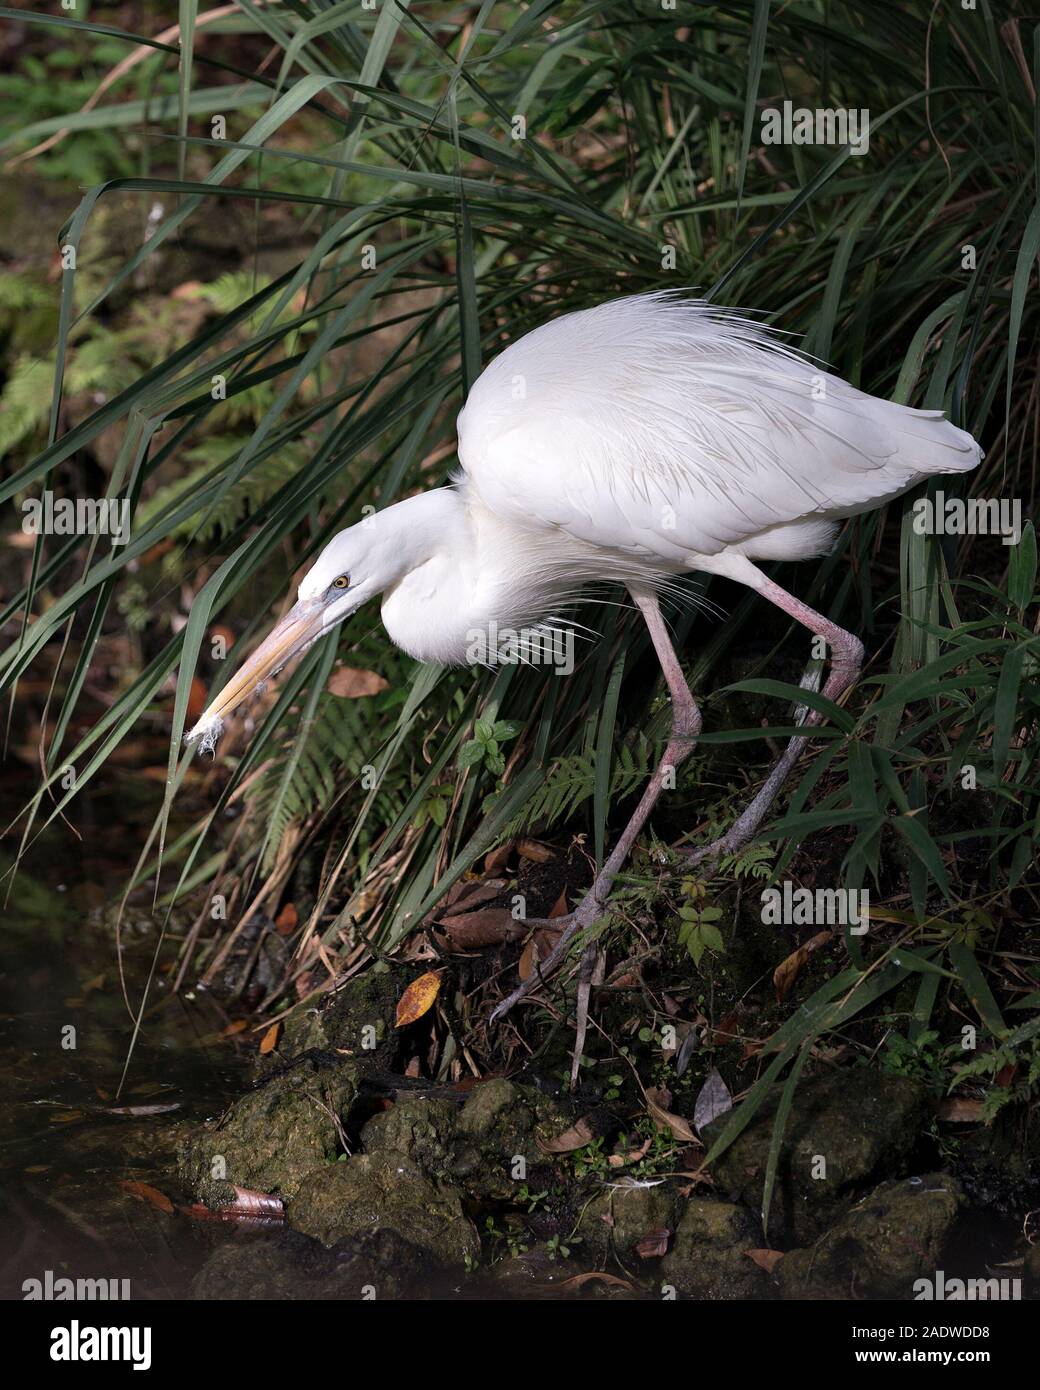 White Heron bird close-up profile view in the water displaying its body, head, eye, beak, long neck, with a beautiful foliage background. Stock Photo